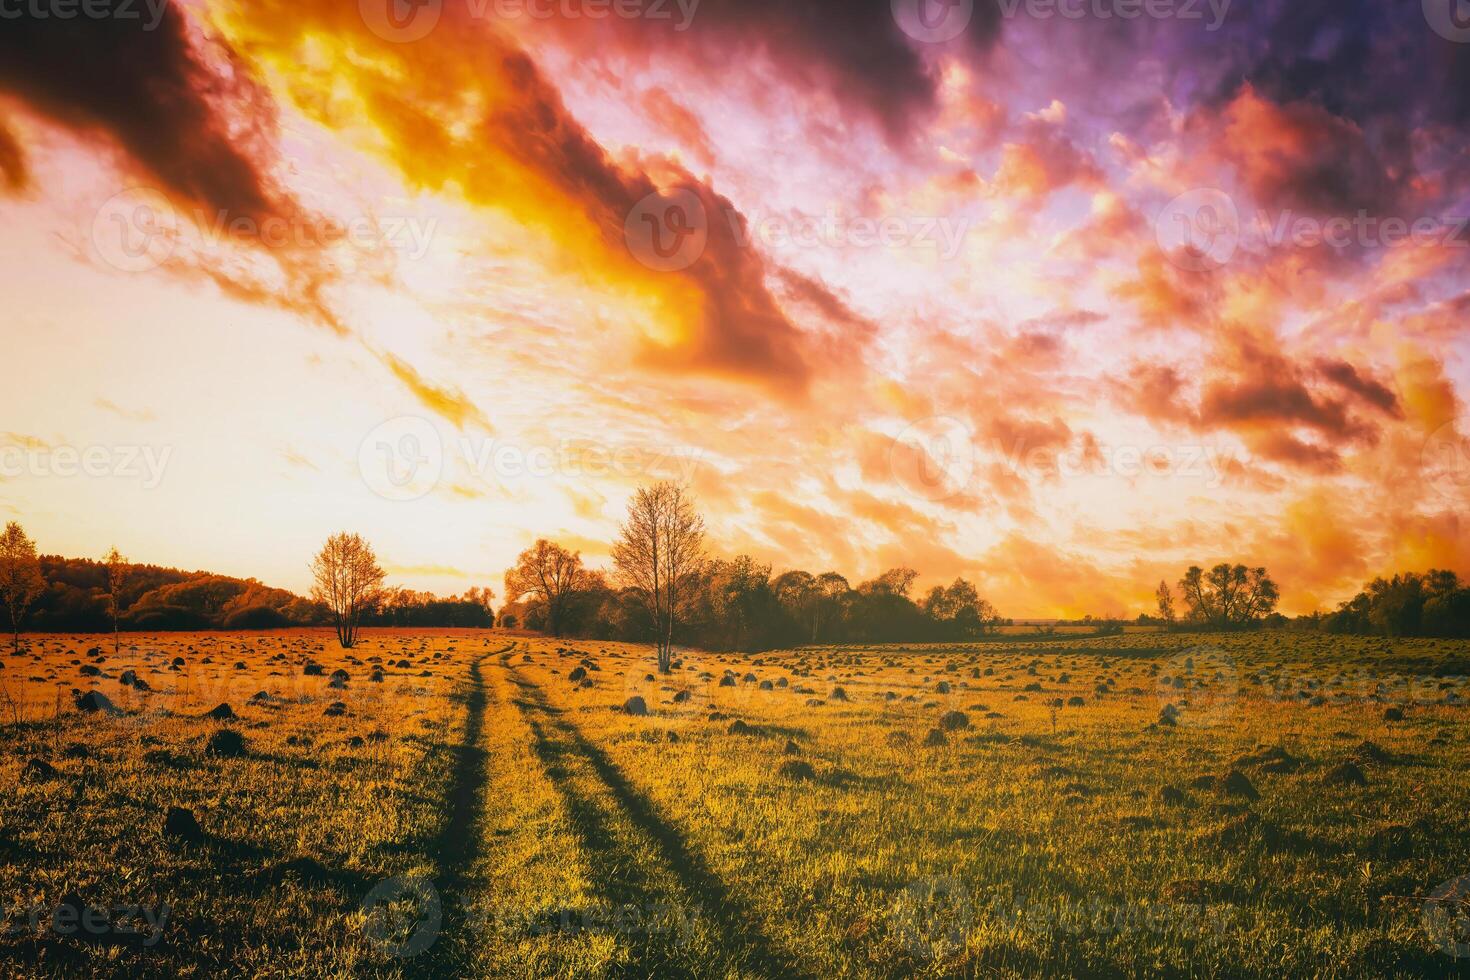 Sunset or sunrise in a spring field with green grass, willow trees and cloudy sky. Vintage film aesthetic. photo